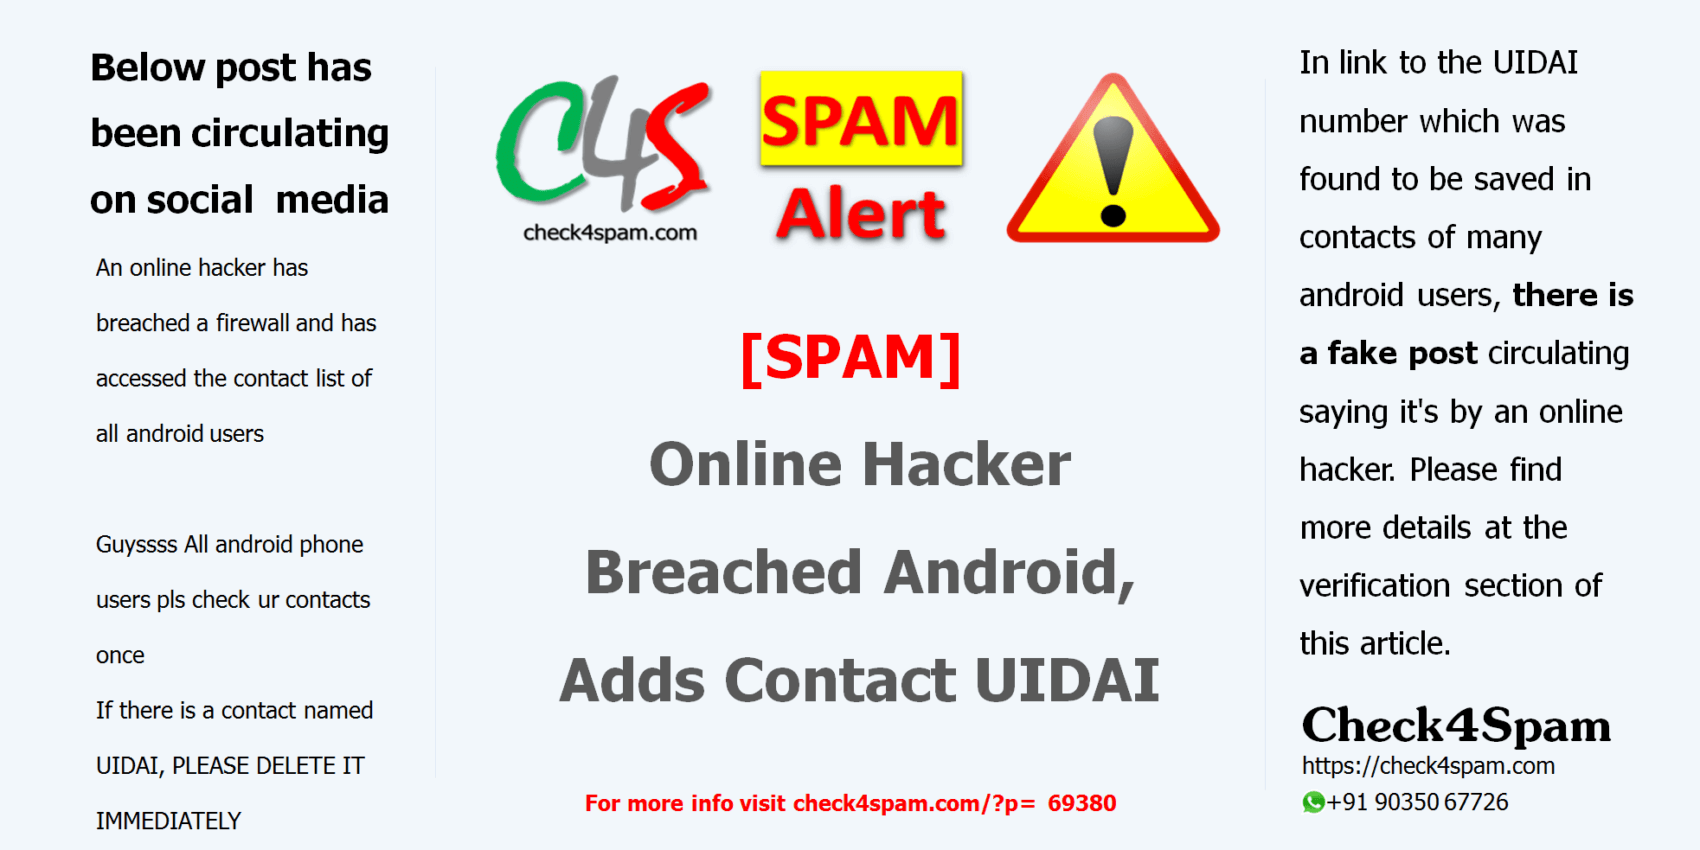 online hacker breached android adds contact uidai - spam